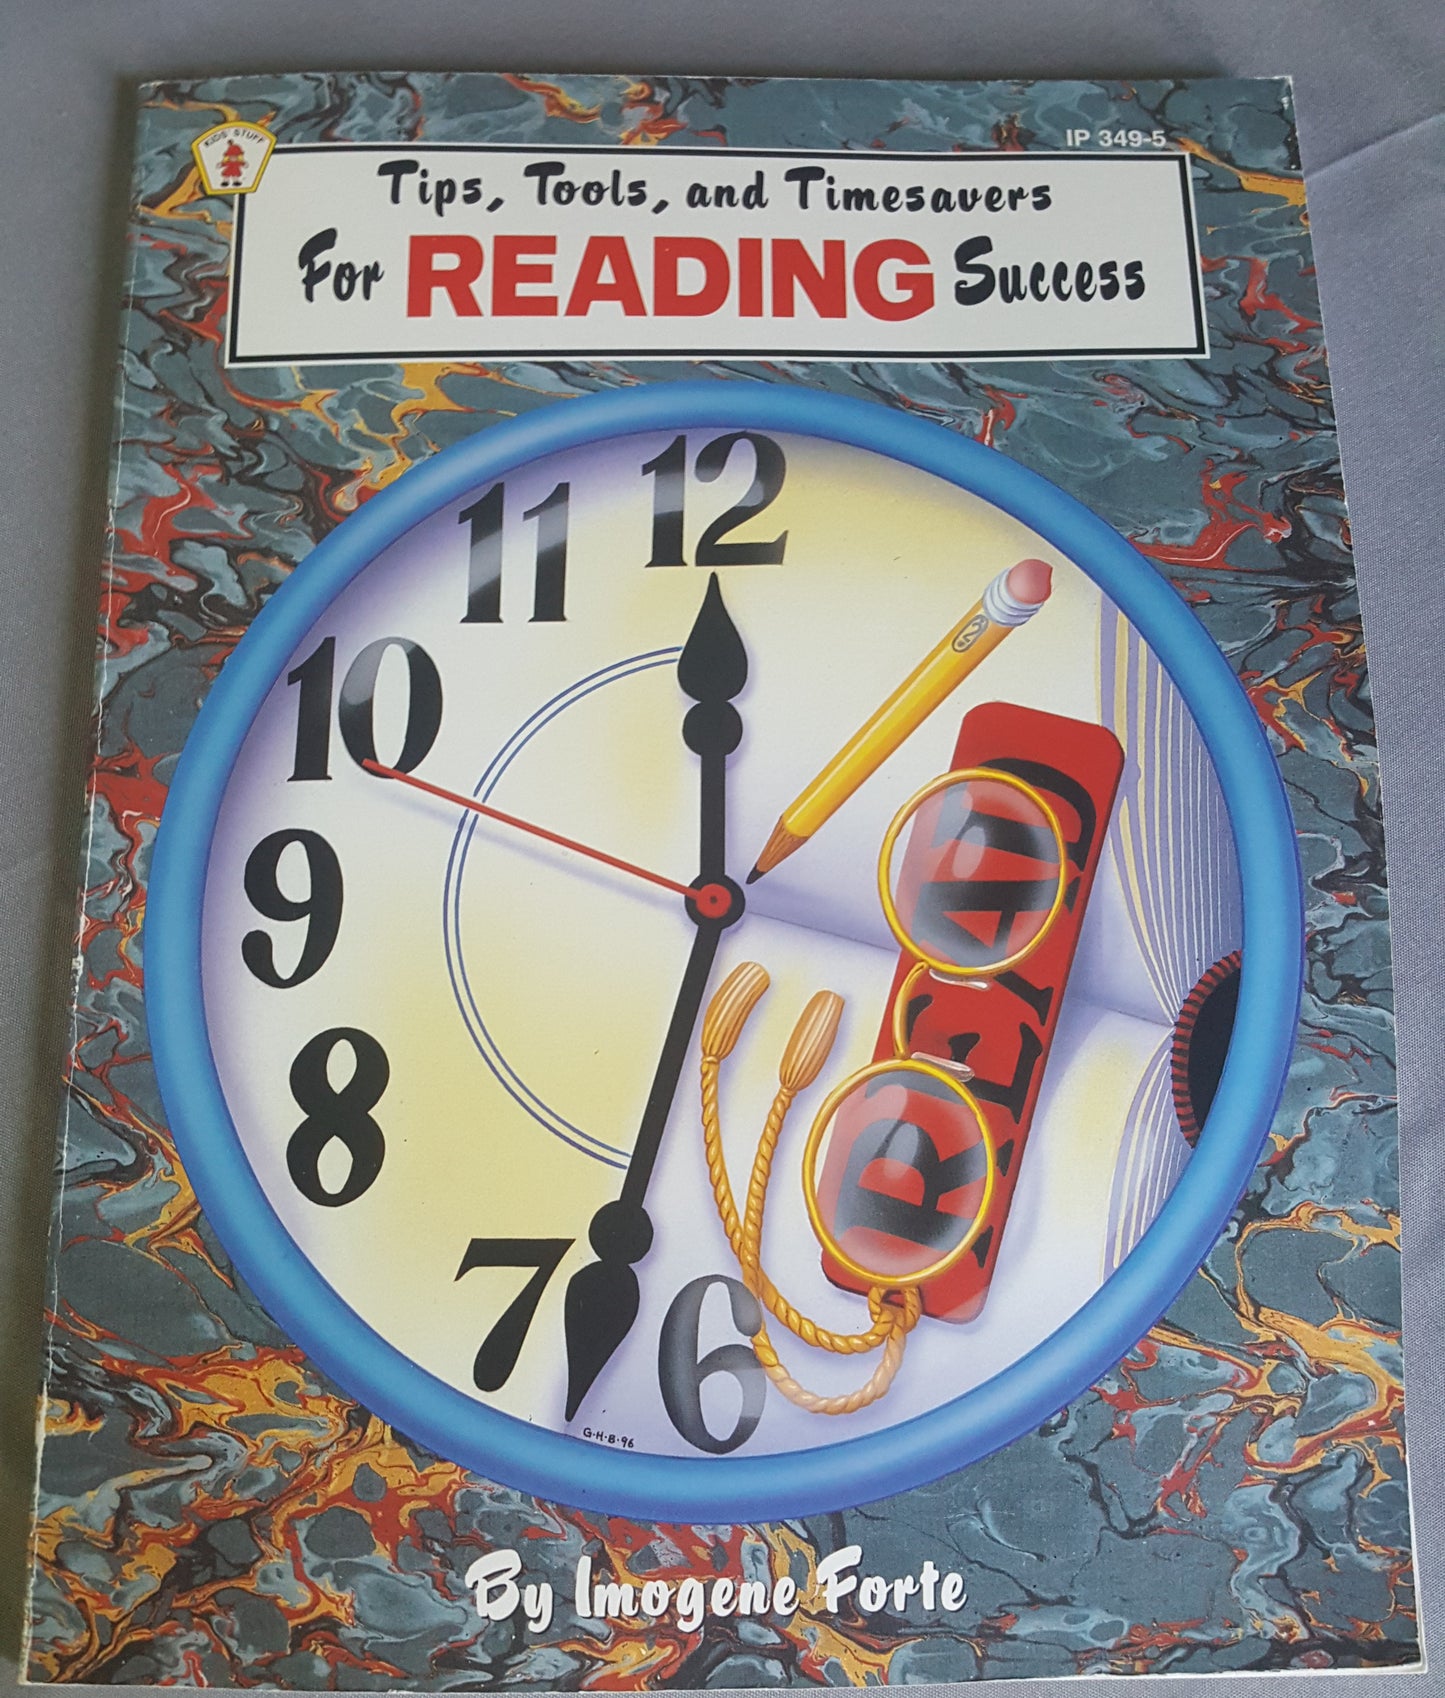 Tips, Tools, and Timesavers For Reading Success